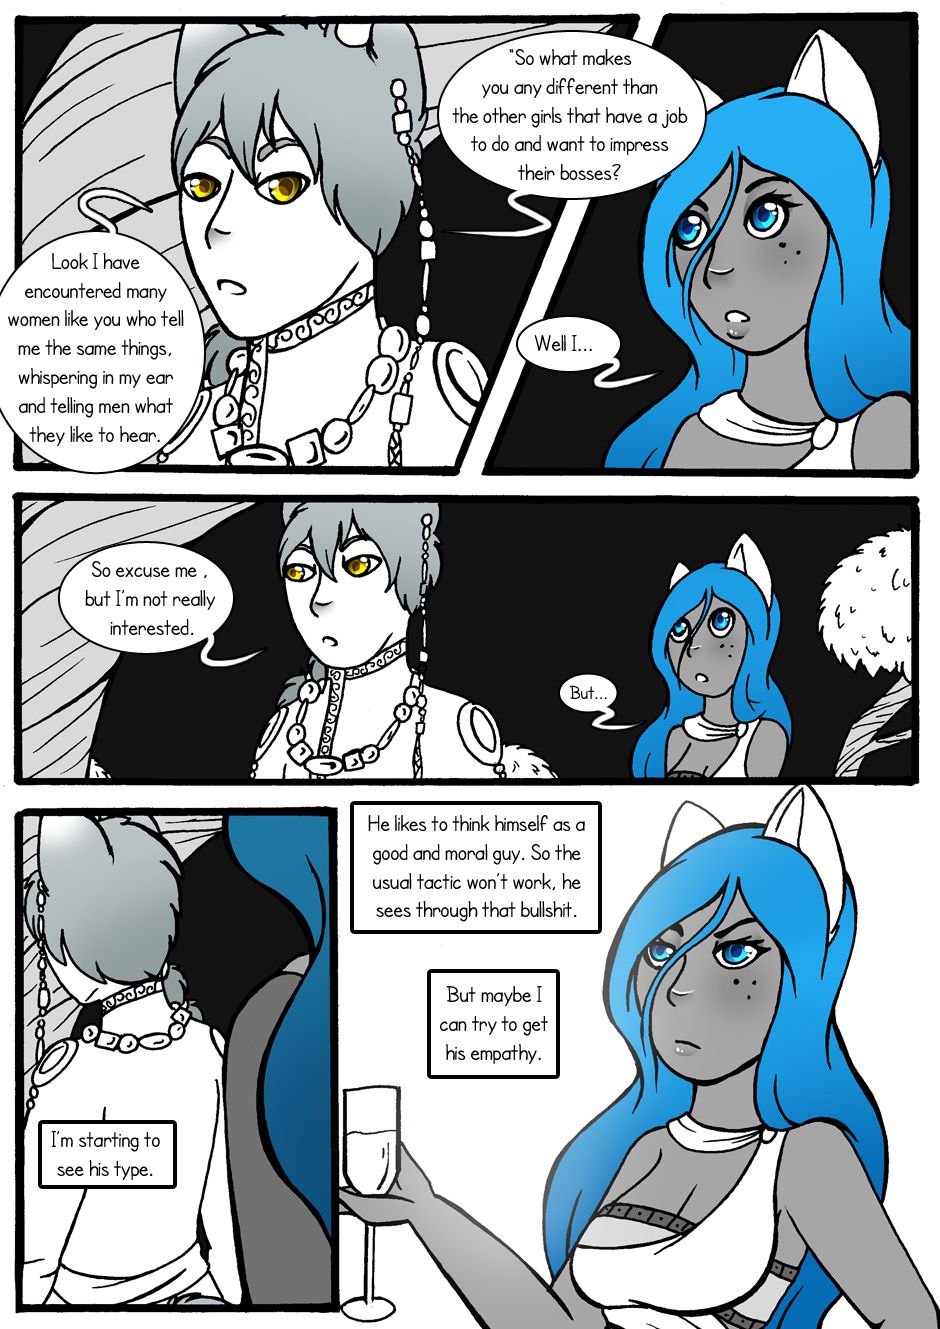 [Jeny-jen94] Between Kings and Queens [Ongoing] 33